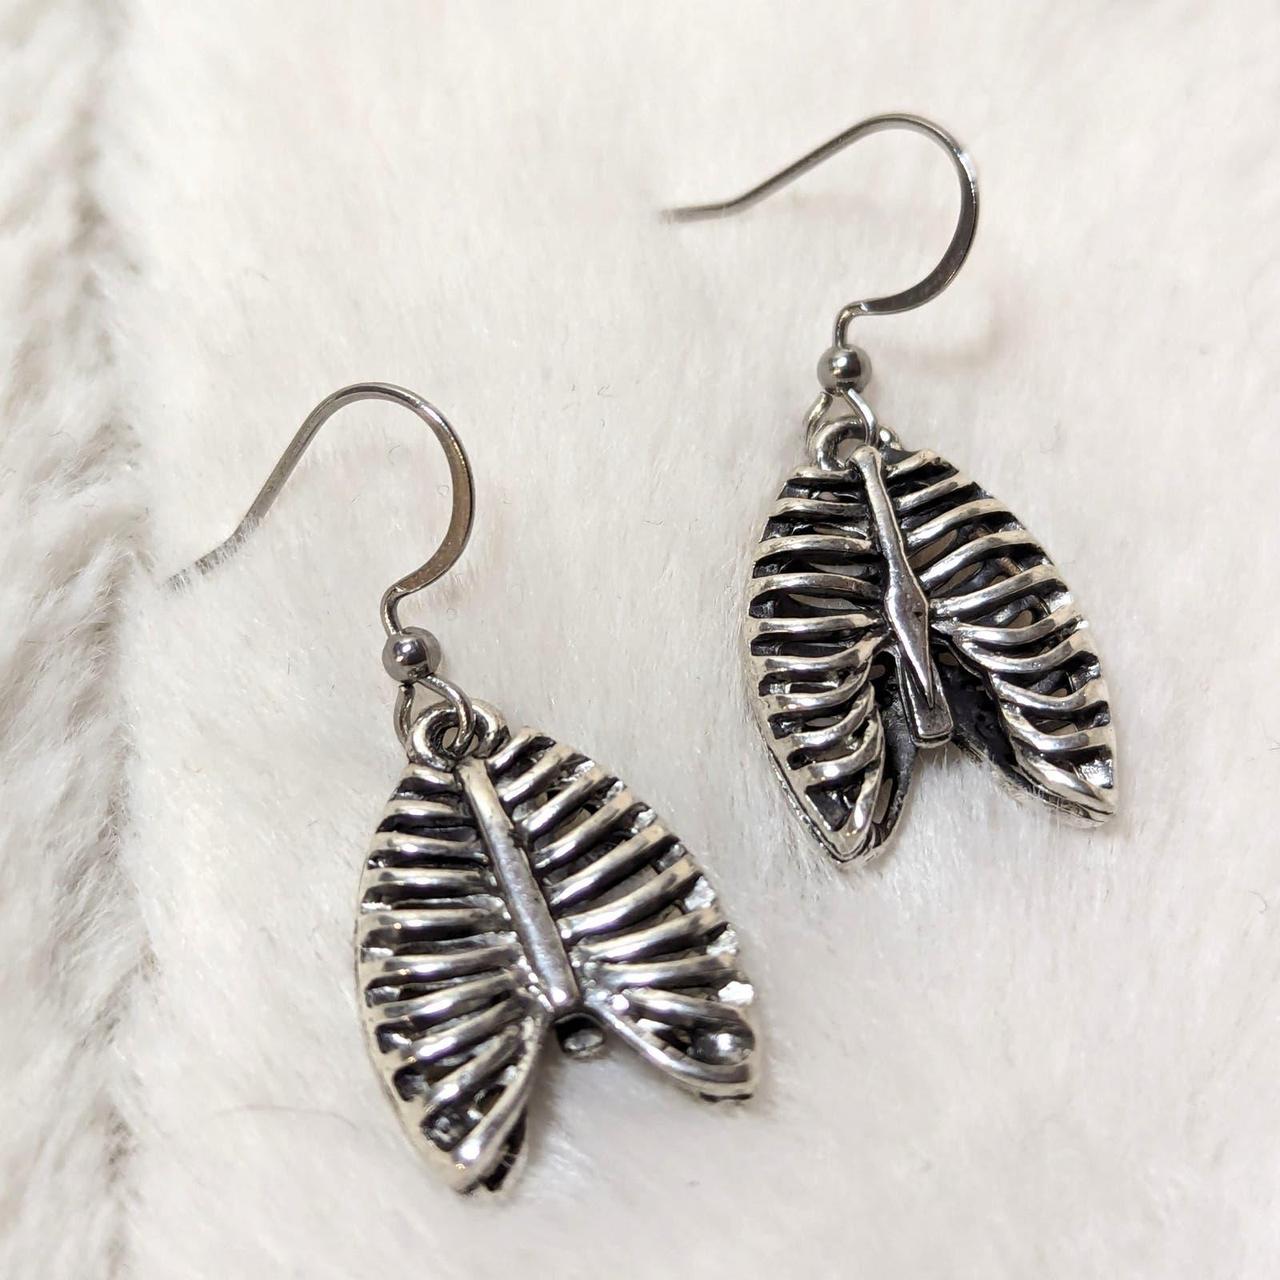 Gothic Style Rib Cage Silver Charm Earrings Comes... - Depop